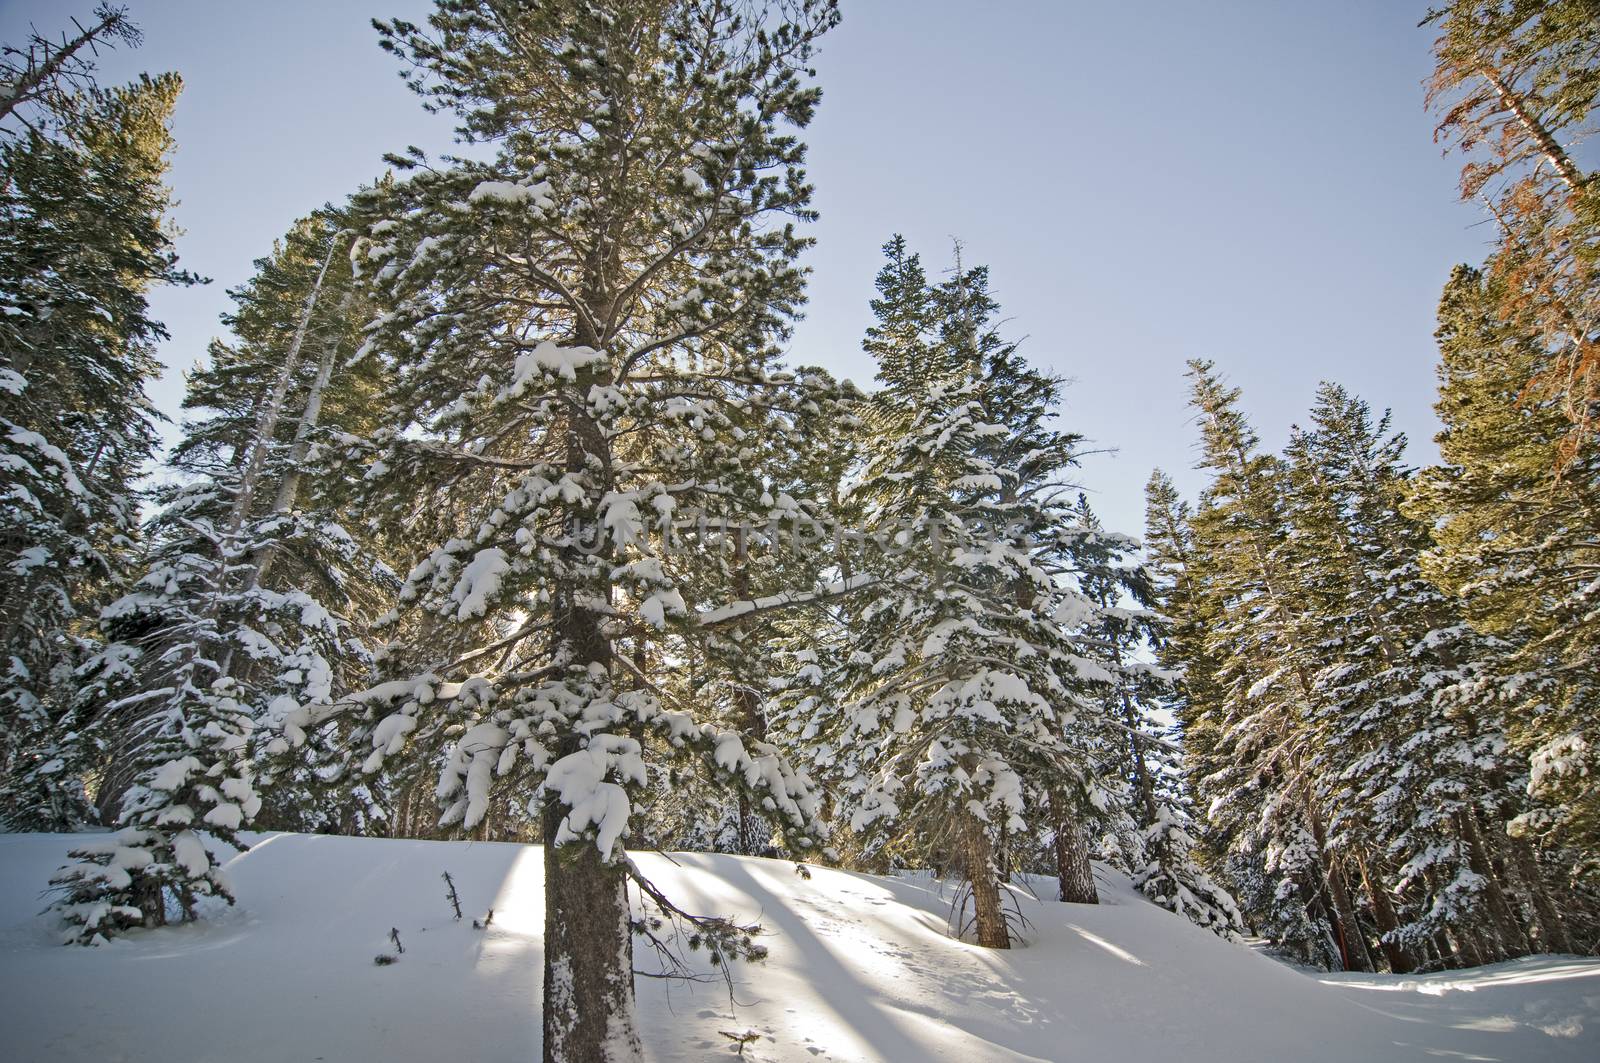 Backlit winter trees in Mammoth Mountain, CA by Njean